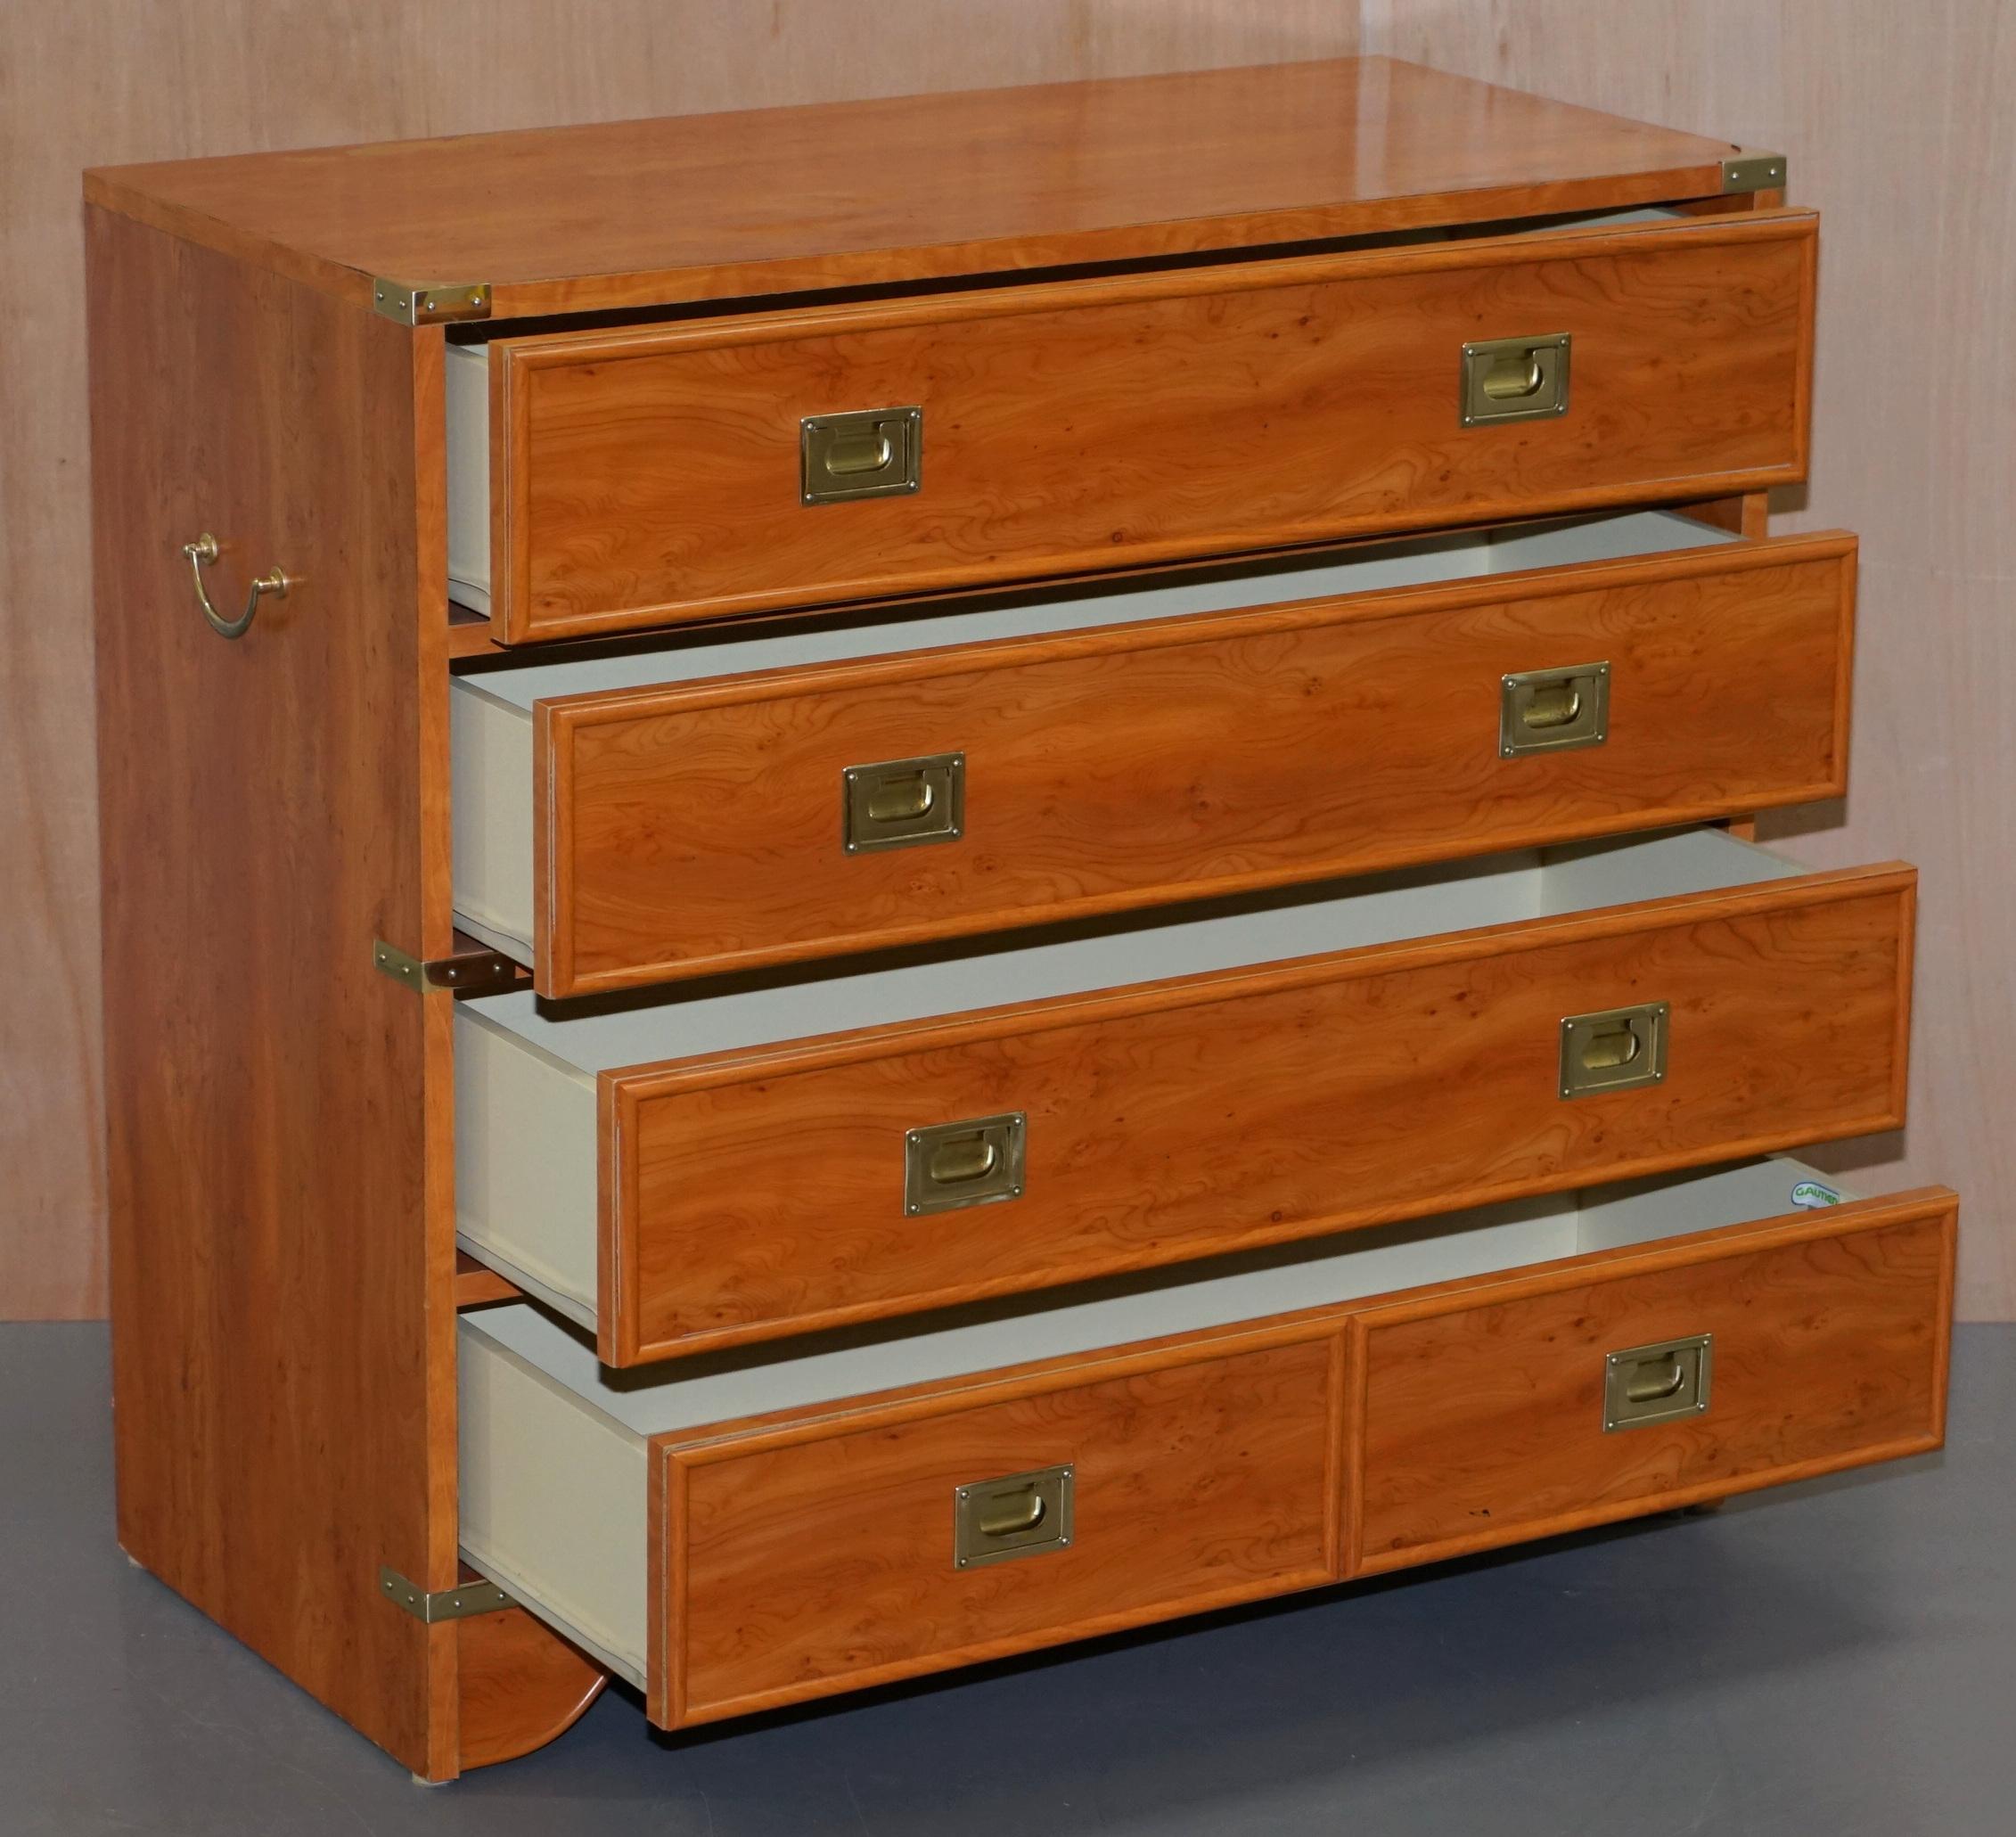 Lovely Vintage Meubles Gautier Made in France Military Campaign Campaigner Chest of Drawers en vente 3